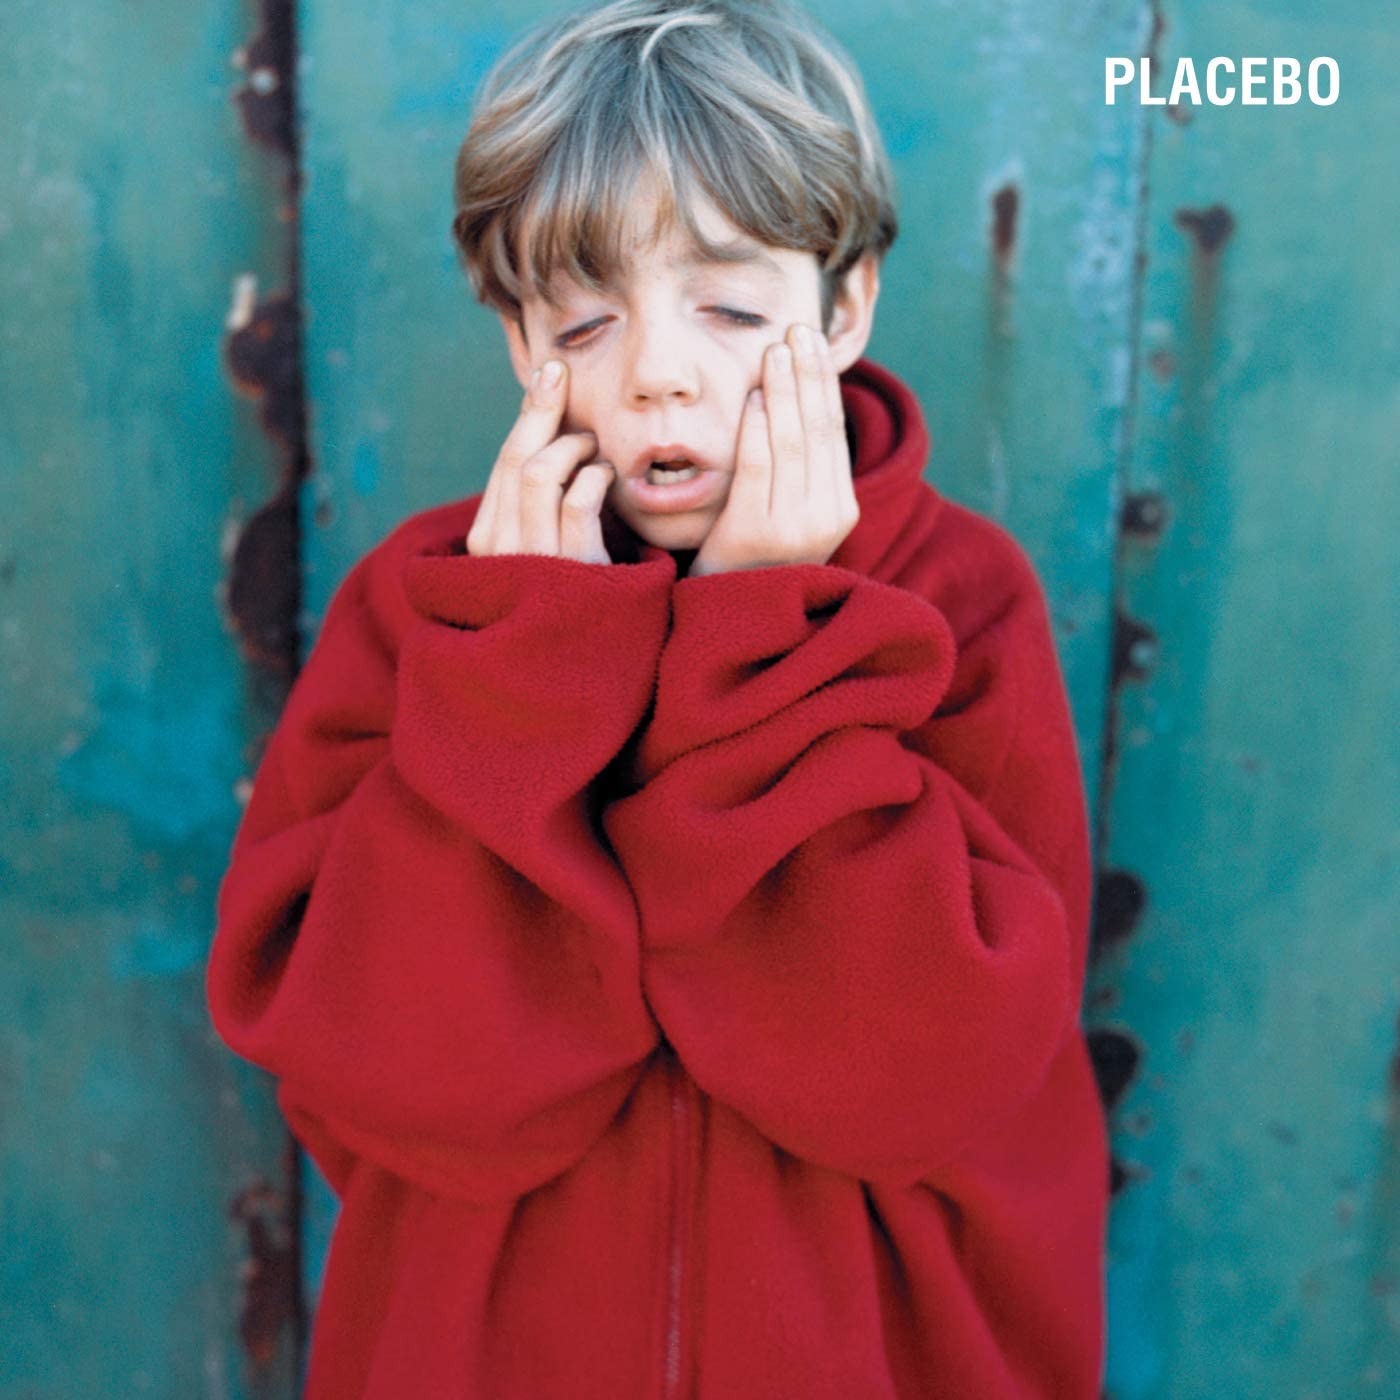 Originally released in July 1996 and now available on standard weight black vinyl, 'Placebo' is the debut studio album from the critically acclaimed Placebo.